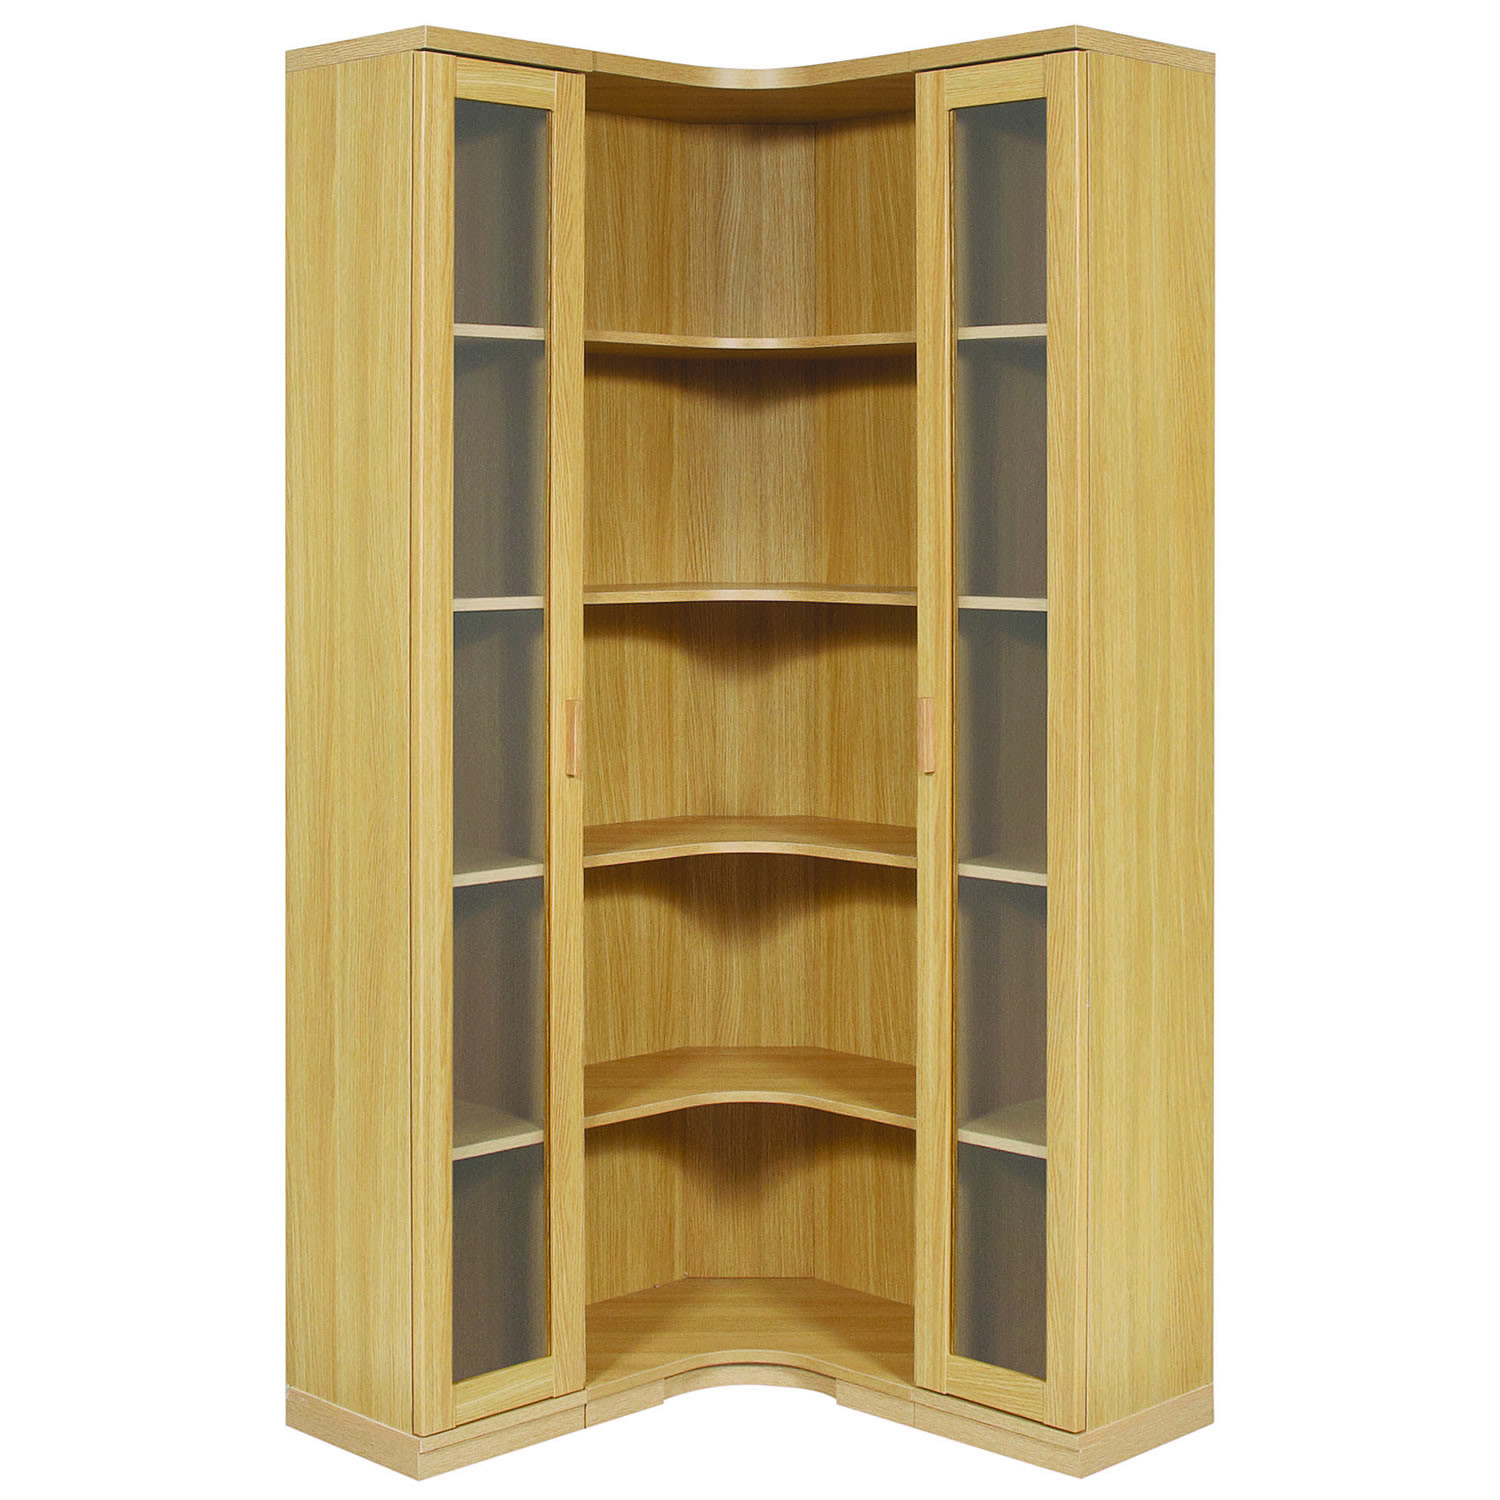 Corner Storage Cabinet For Bedroom
 Furniture Make The Most Out Your Unused Corner Spaces